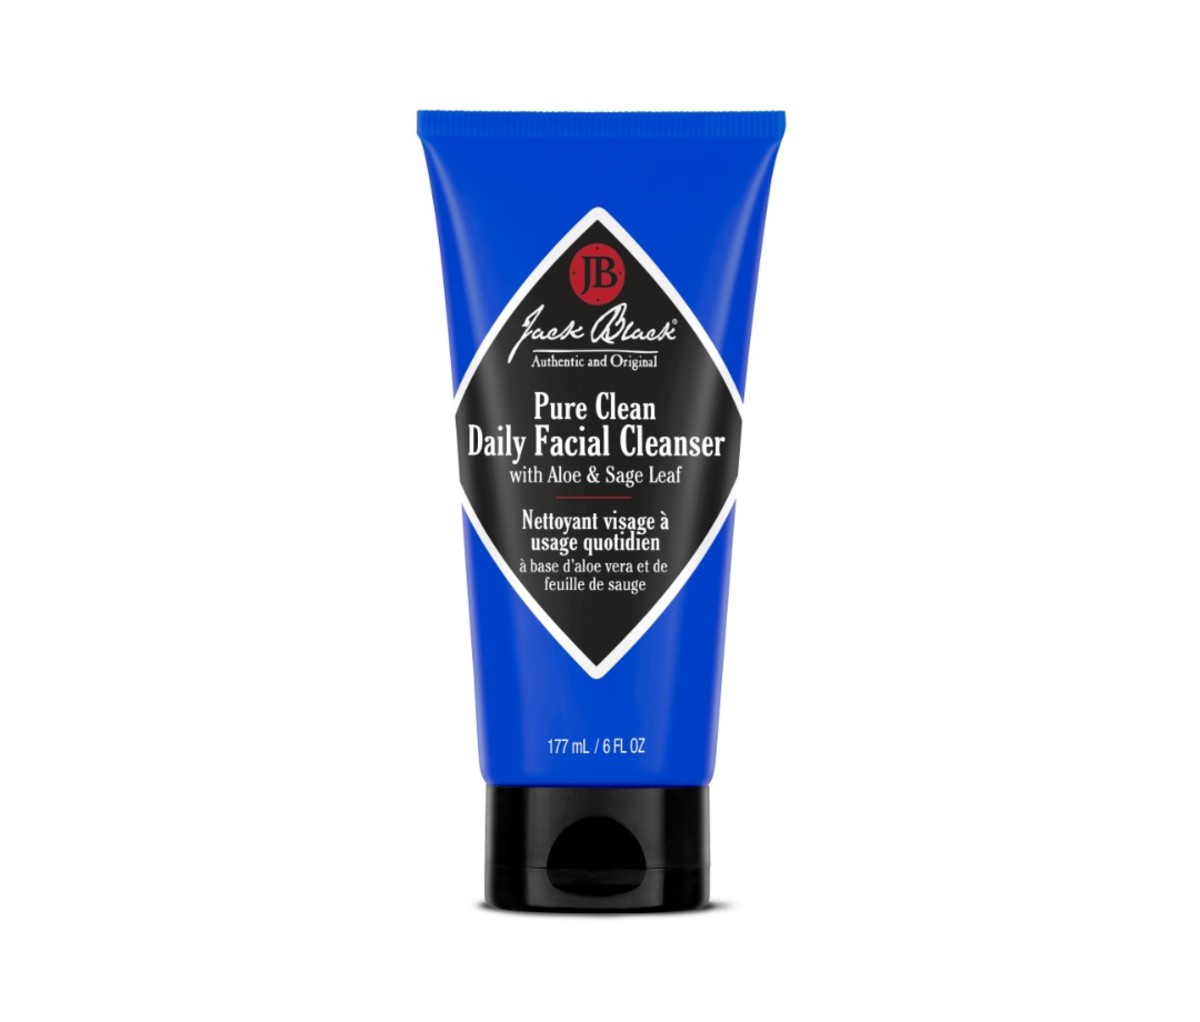 Jack Black Pure Clean Daily Facial Cleanser best face wash for men